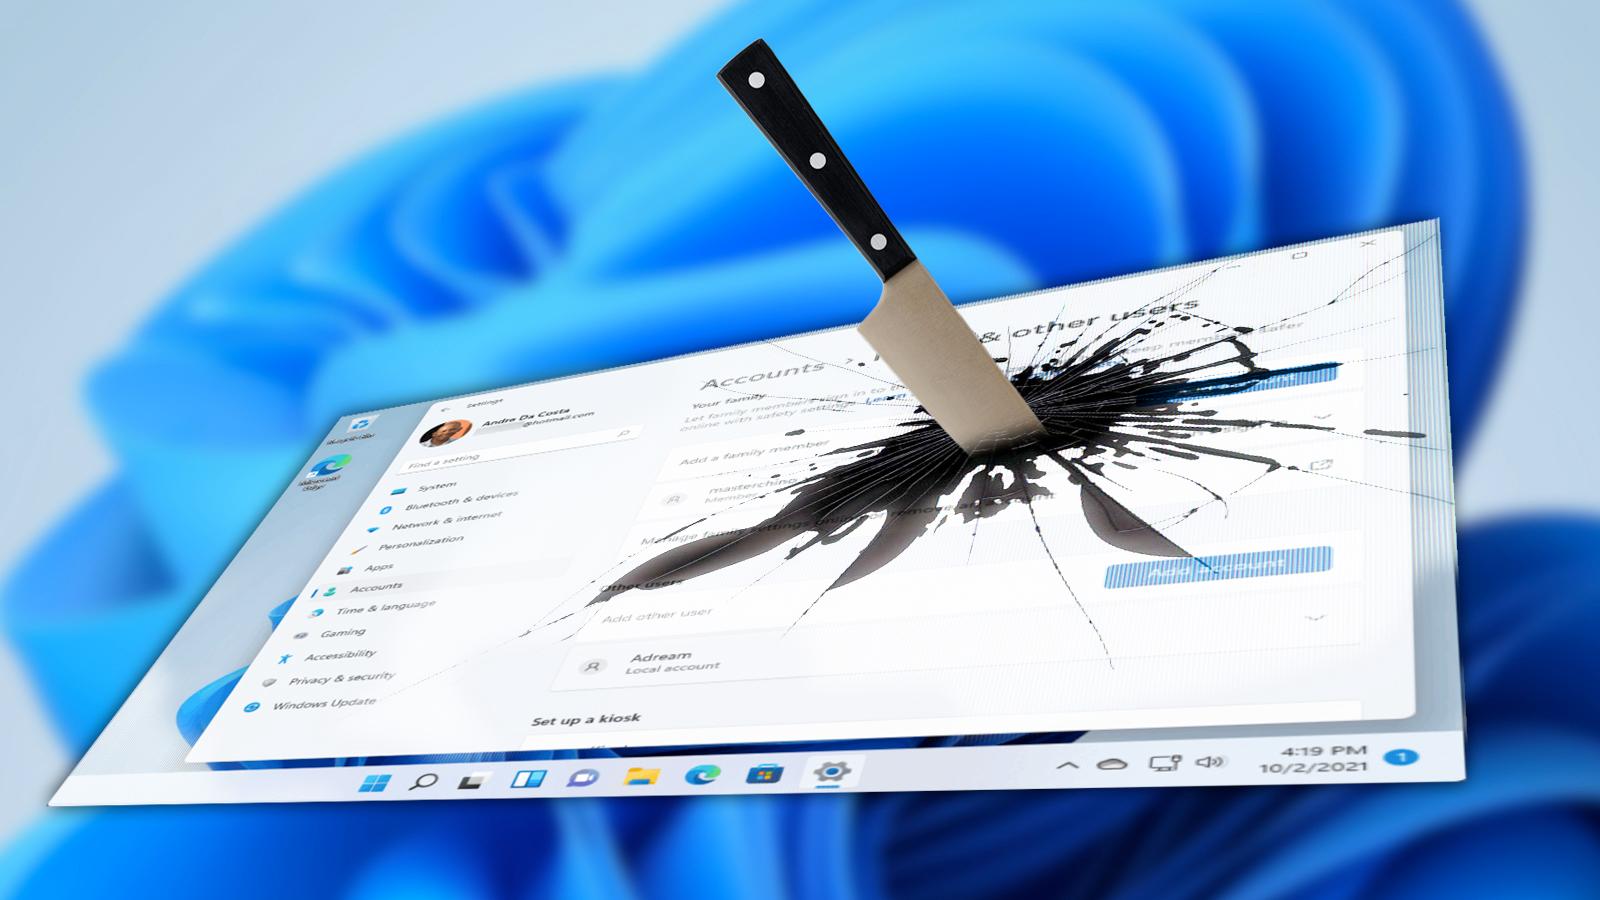 Windows 11 with knife through it